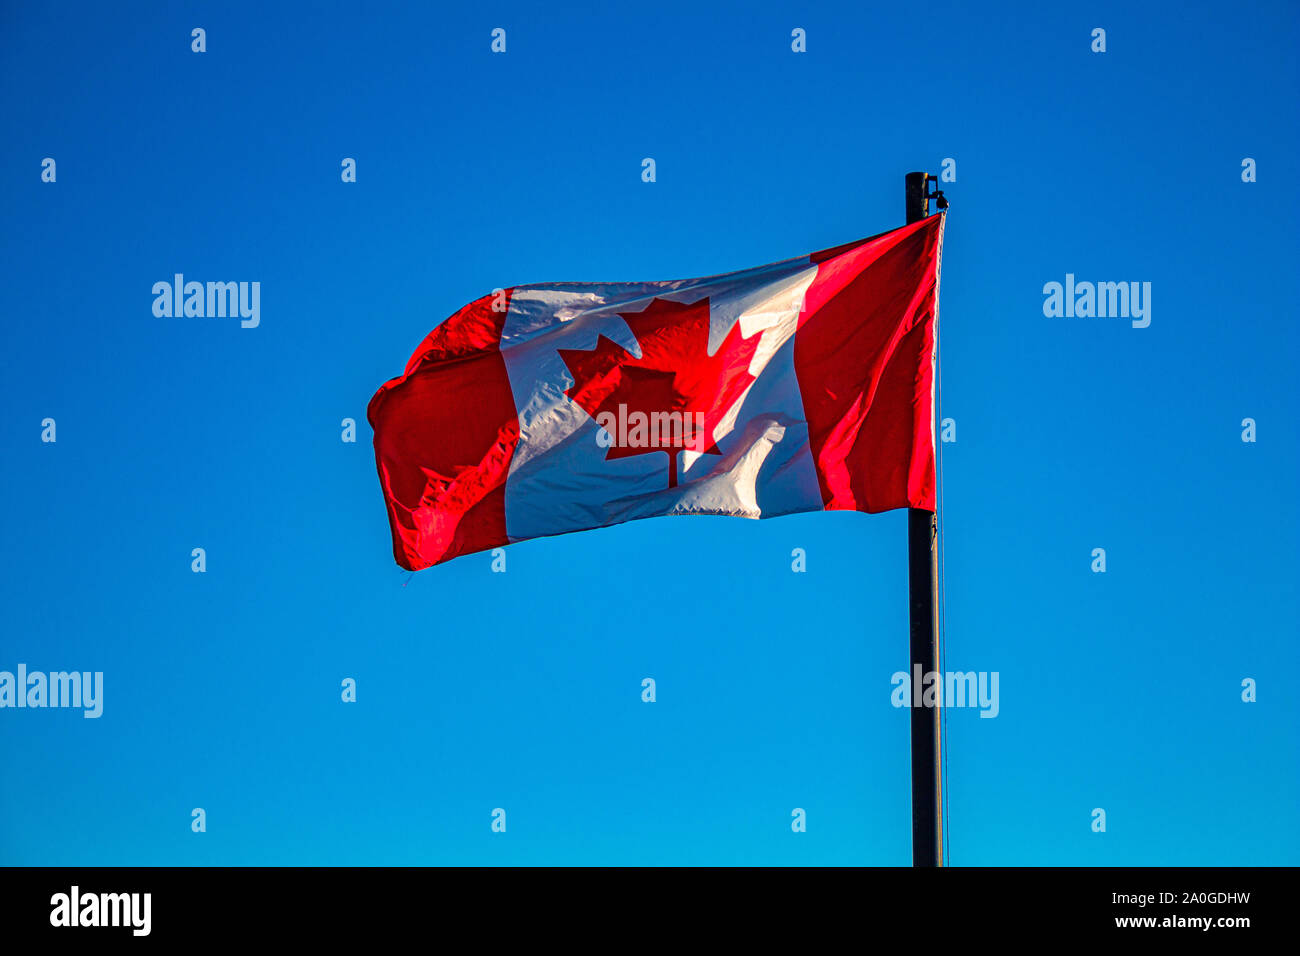 A Canadian flag blows on its flagpole in the wind. The red and white flag  of Canada is adorned with a maple leaf and is here viewed in bright color  Stock Photo -